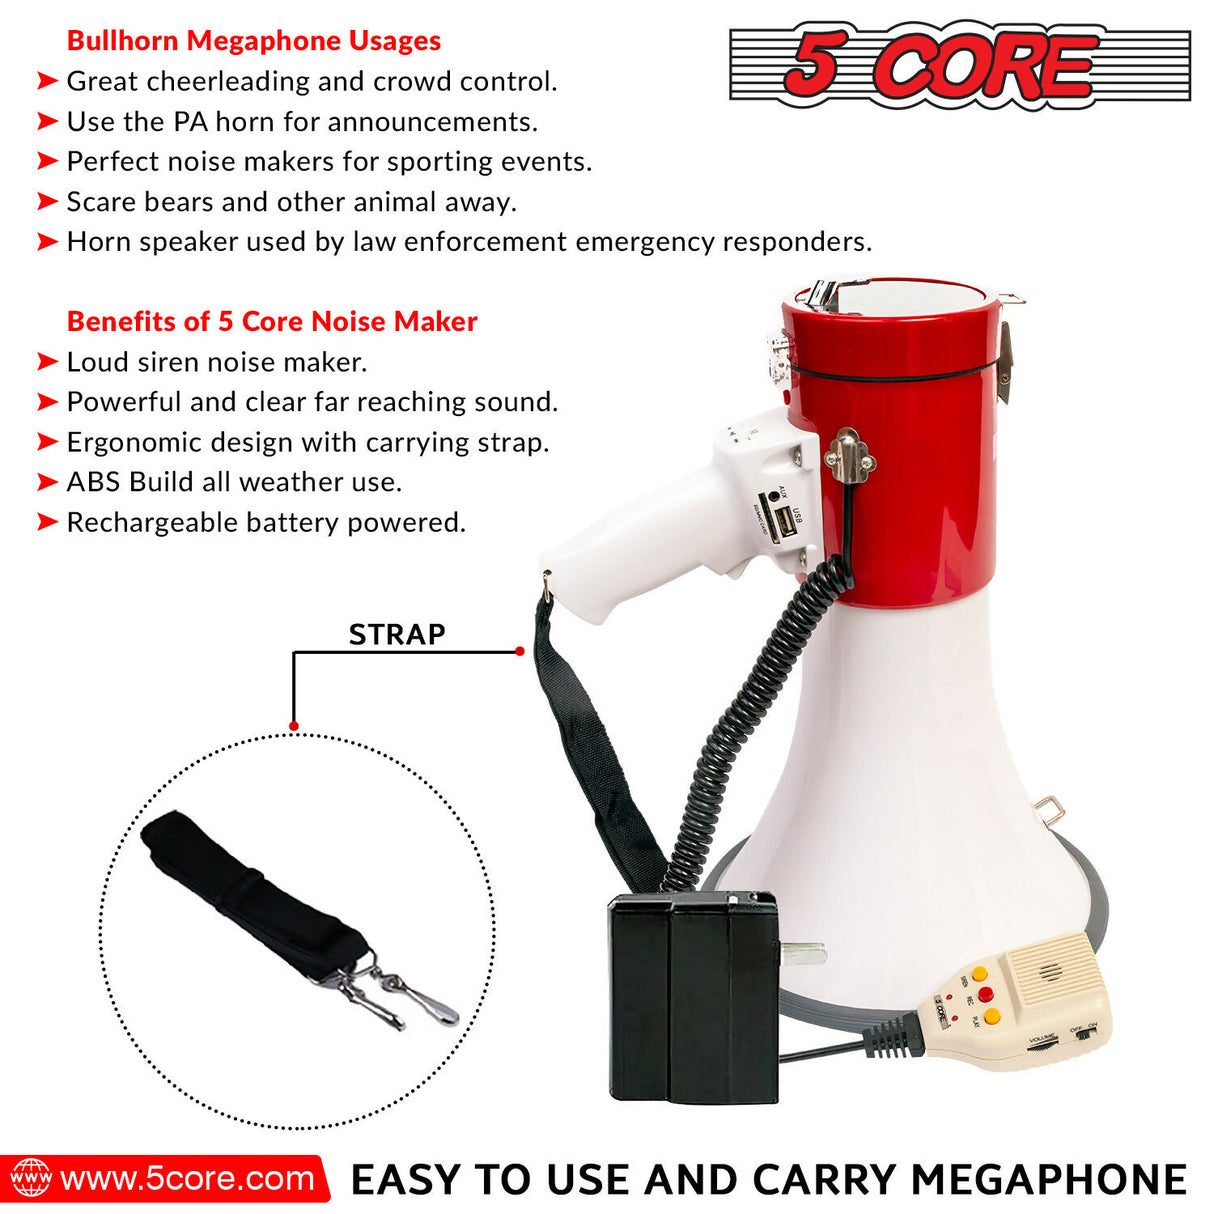 The small bullhorn is a great voice amplifier. It has siren and rechargeable bullhorn features.